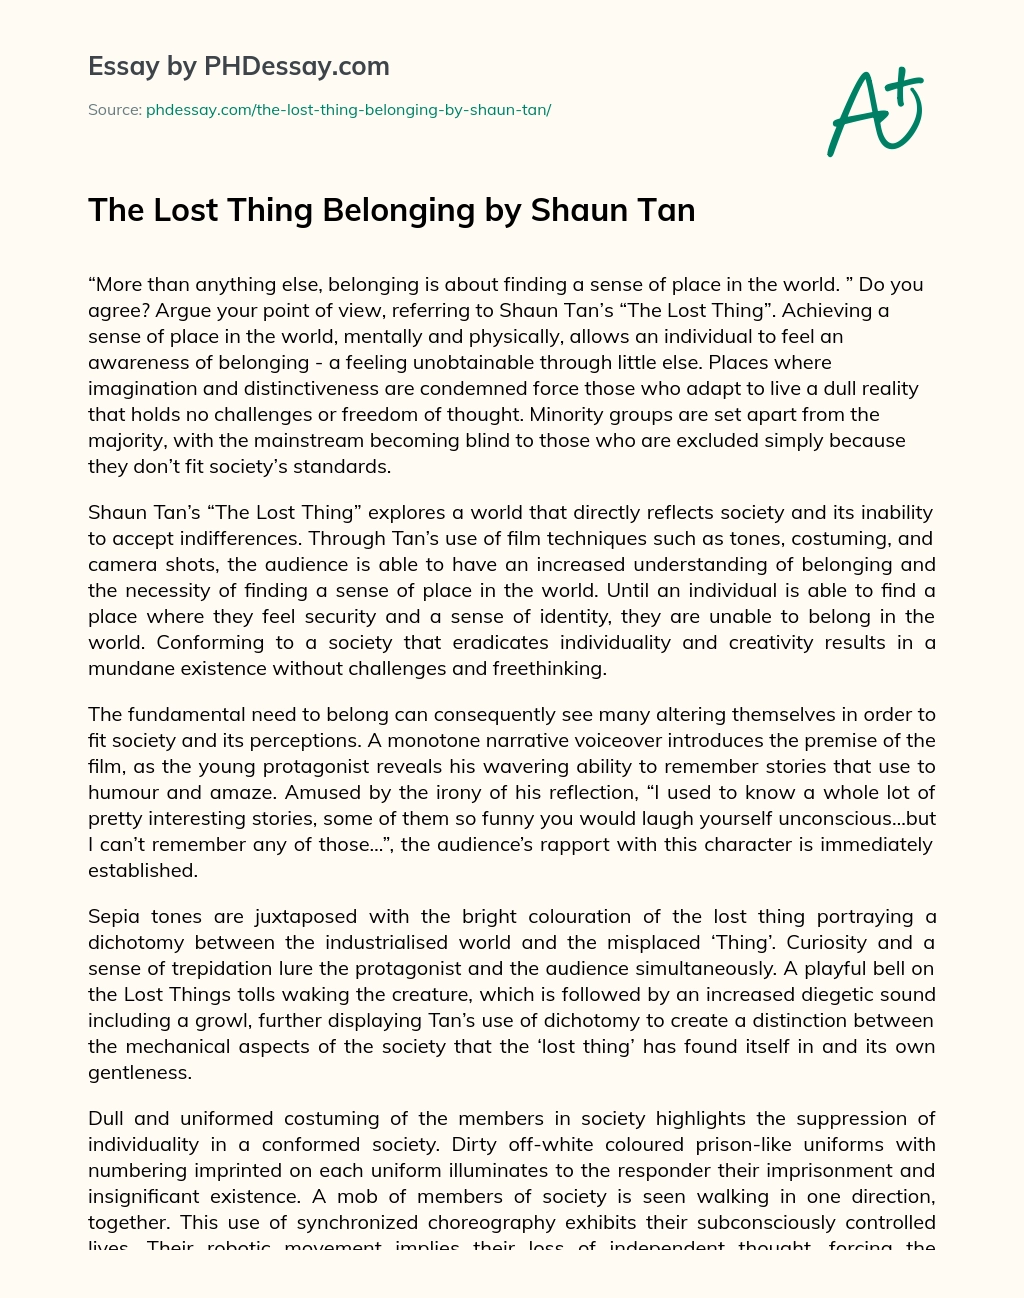 The Lost Thing Belonging by Shaun Tan essay